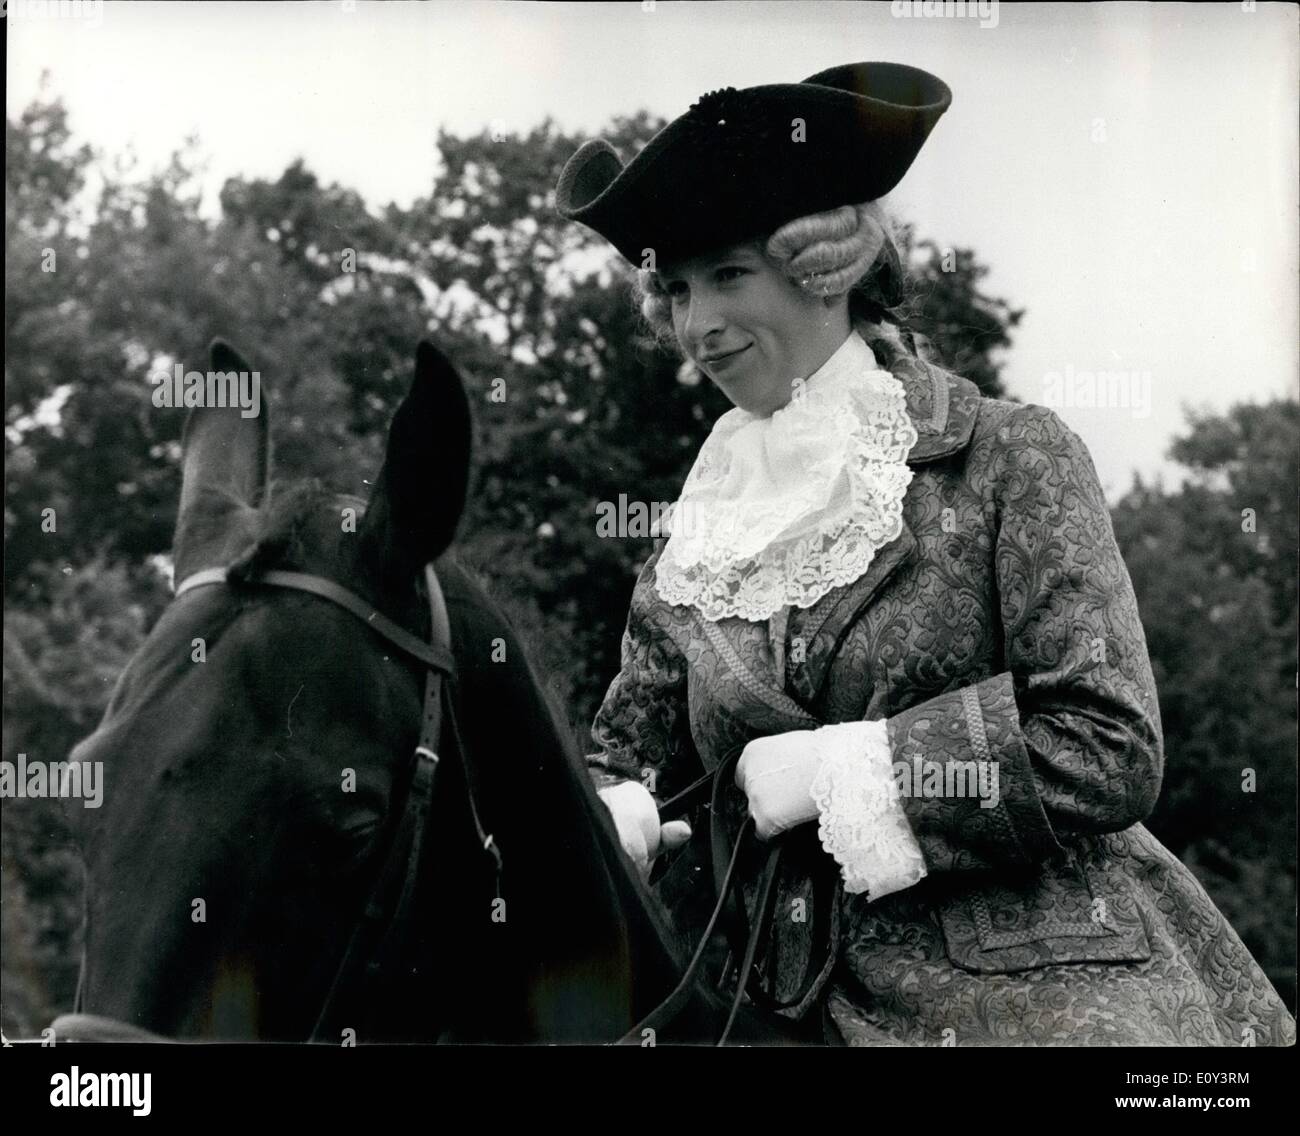 Jul. 07, 1968 - princess Anne takes part in the competition day at Benadene: photo shows princess Anne in period costume takes part in ''The Quadrille'' at Benadene in the Mort-house ridding school. Stock Photo